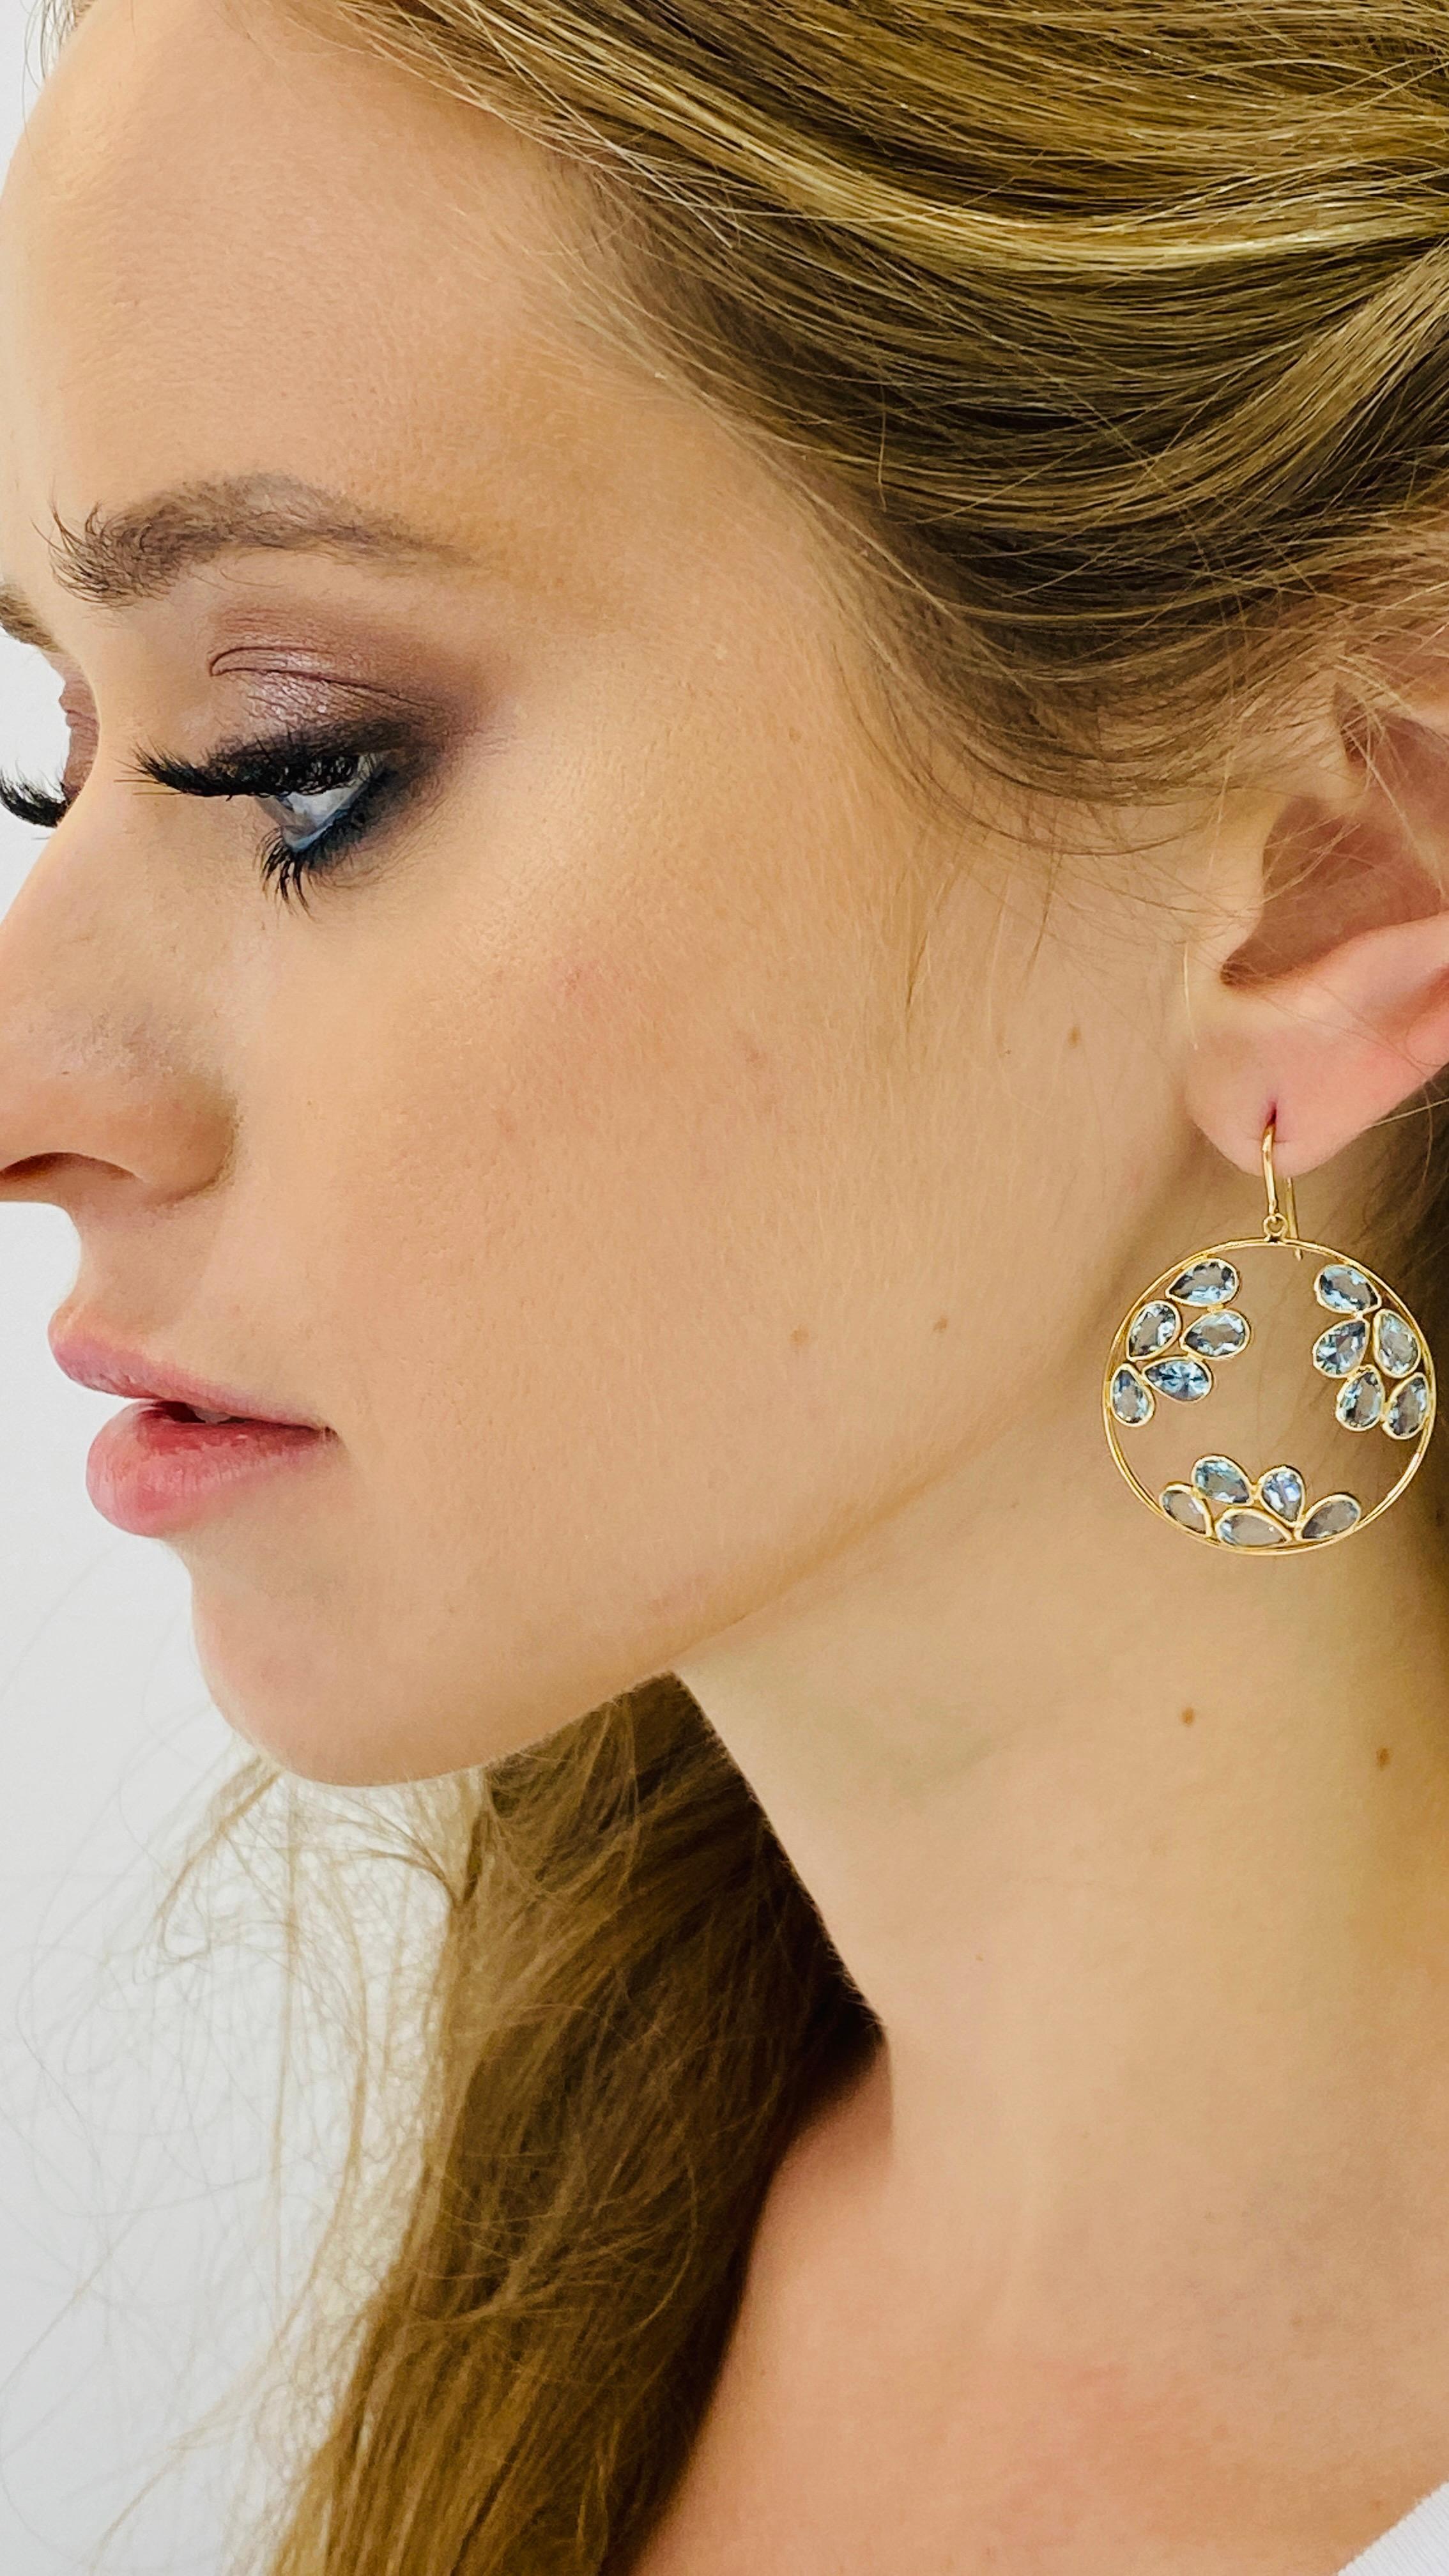 Tresor Beautiful Earring feature 10.40 carats of Aquamarine. The Earring is an ode to the luxurious yet classic beauty with sparkly gemstones and feminine hues. Their contemporary and modern design make them perfect and versatile to be worn at any